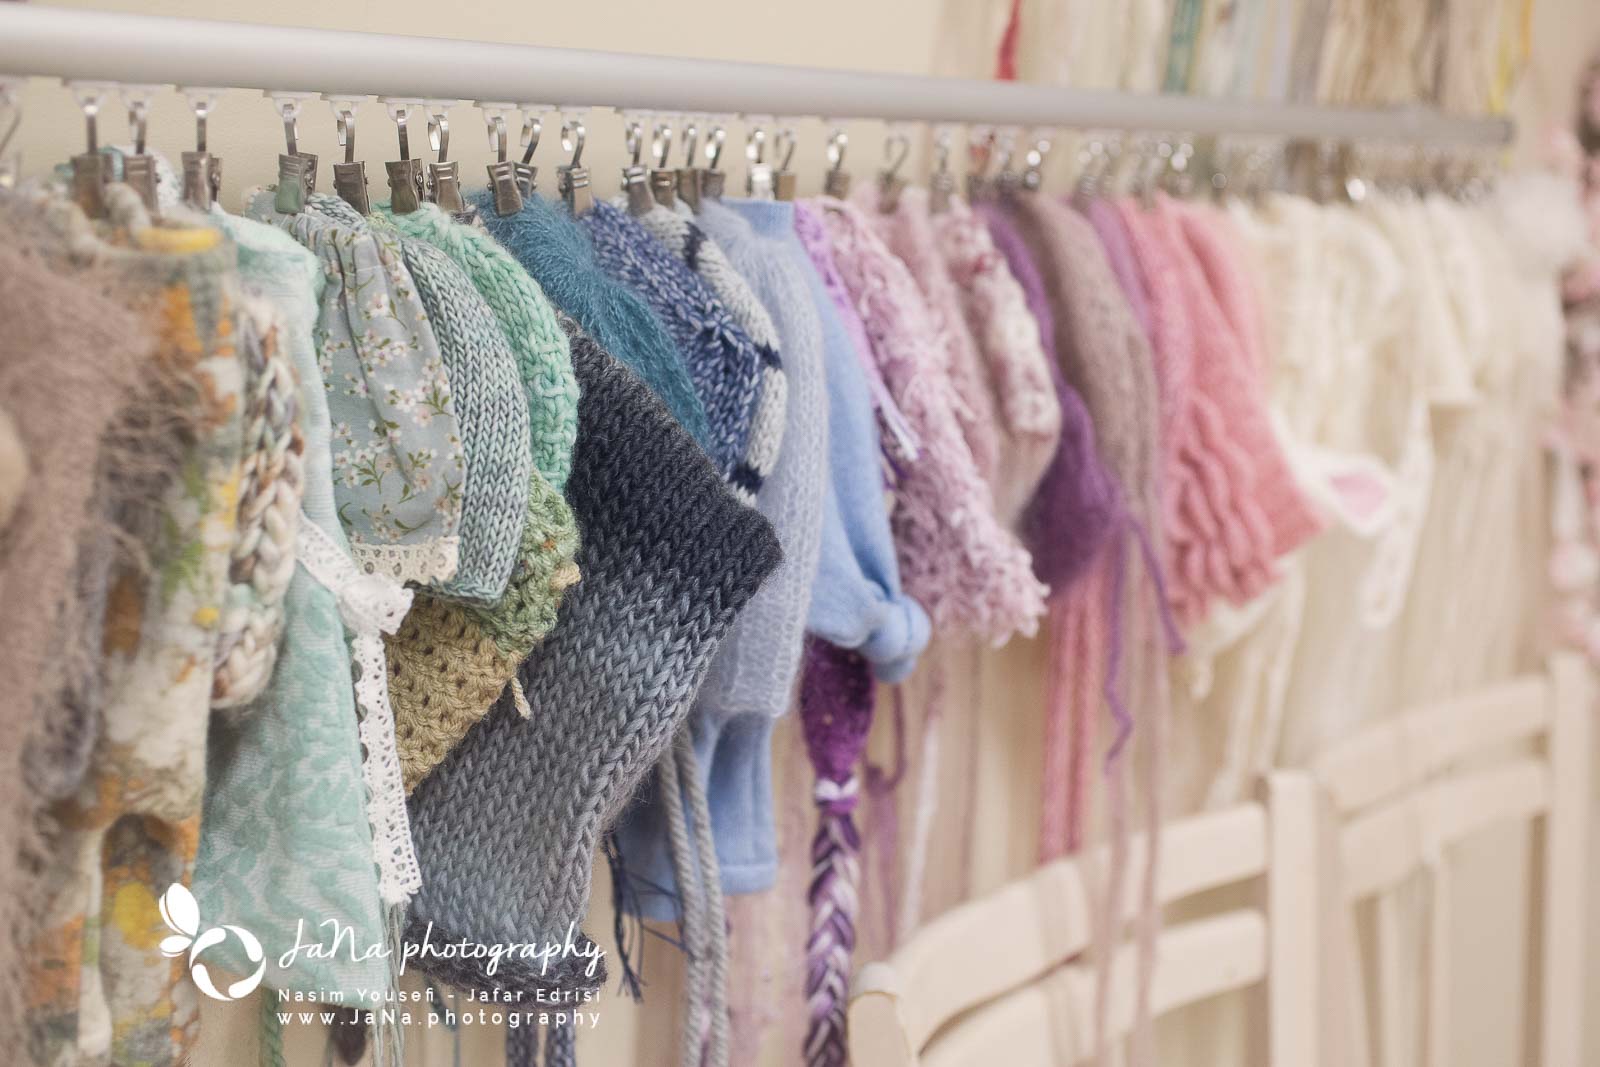 lovely collection for newborns